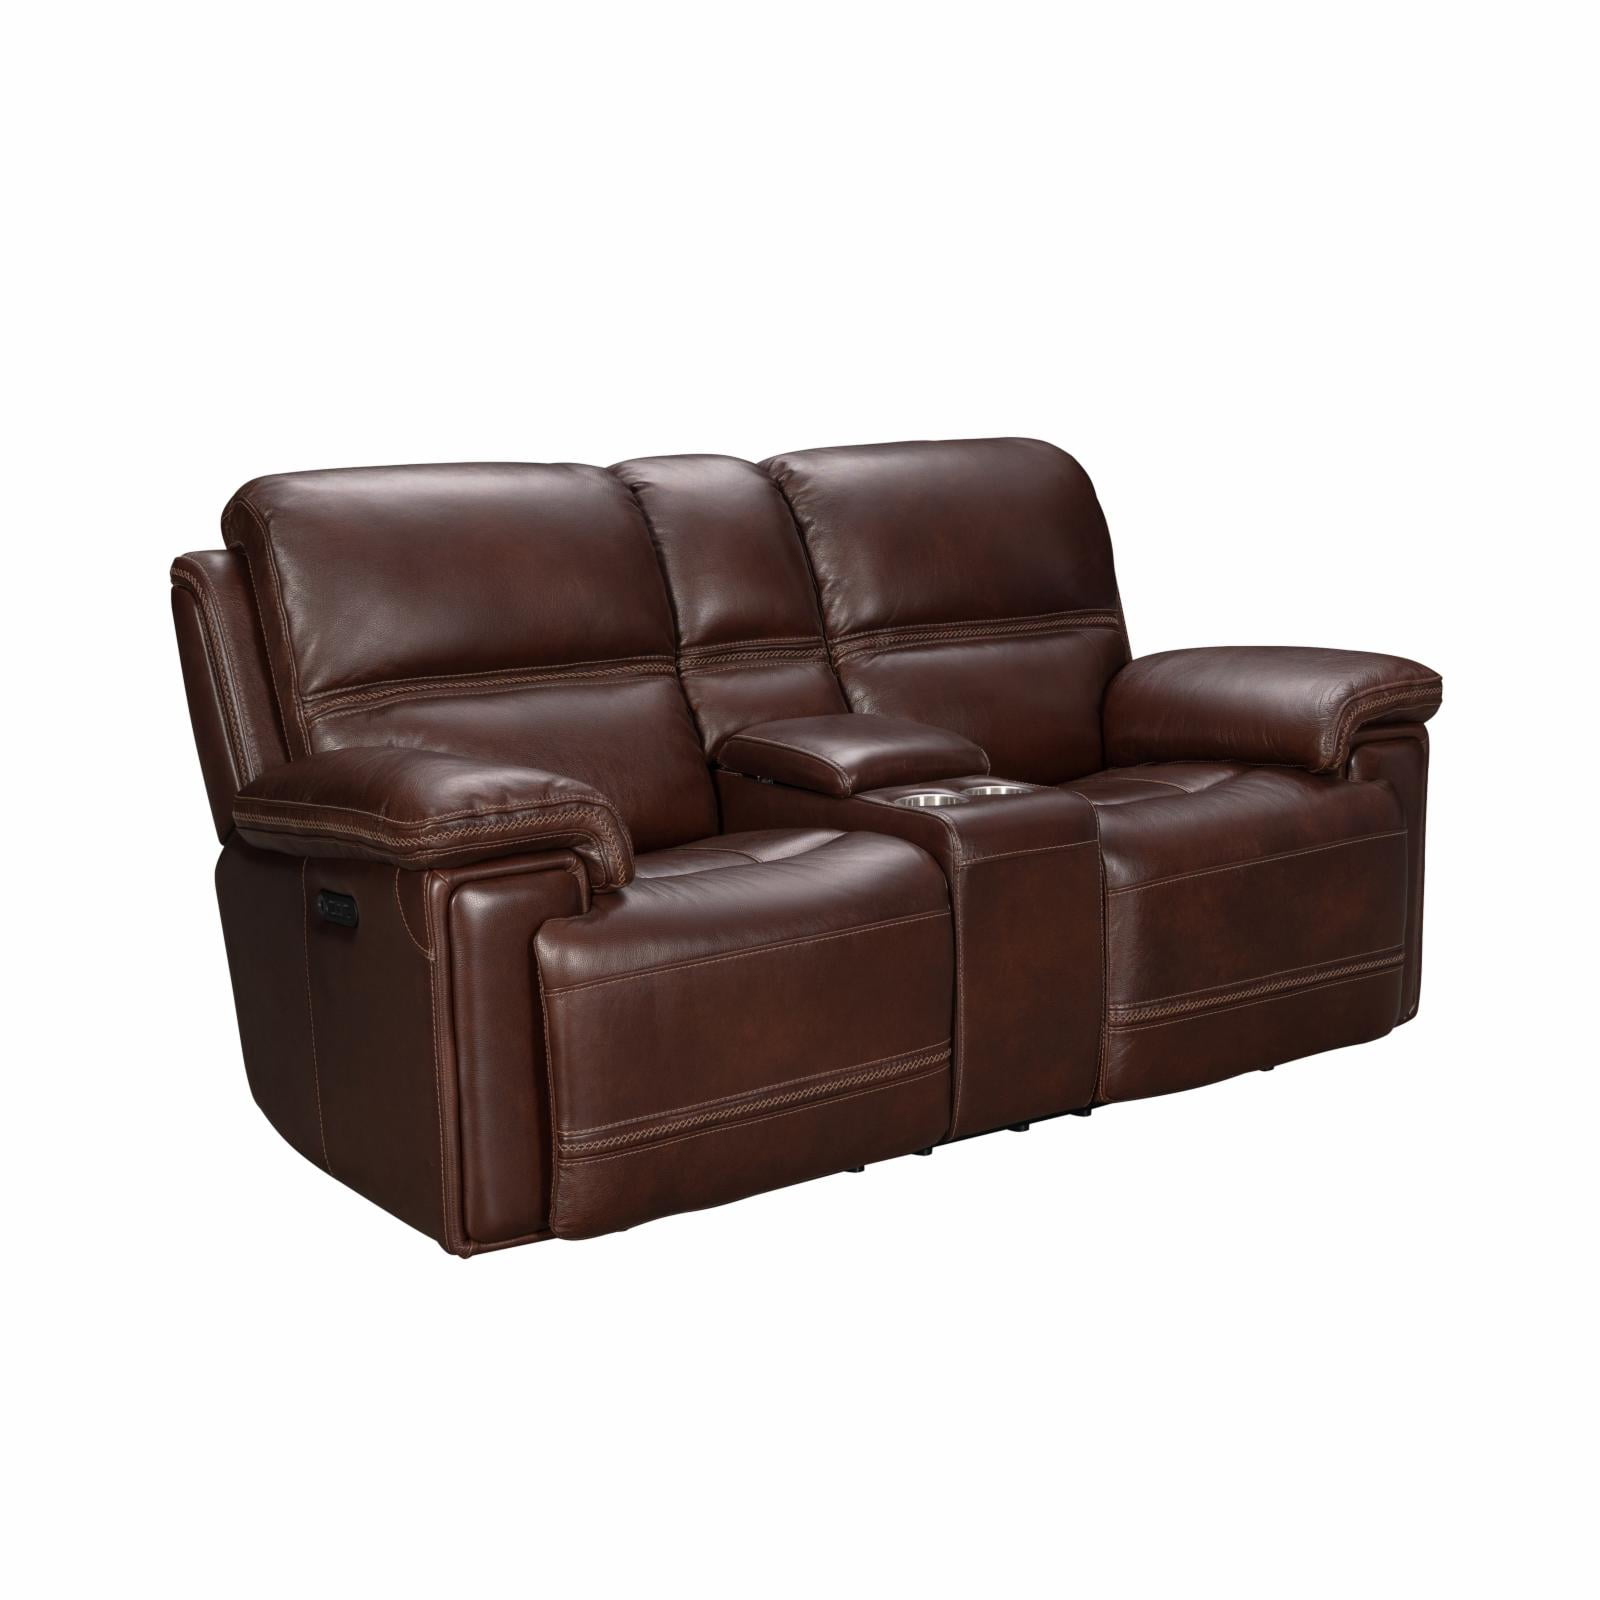 Signature Design By Ashley Buncrana, Leather Loveseat Power Recliner